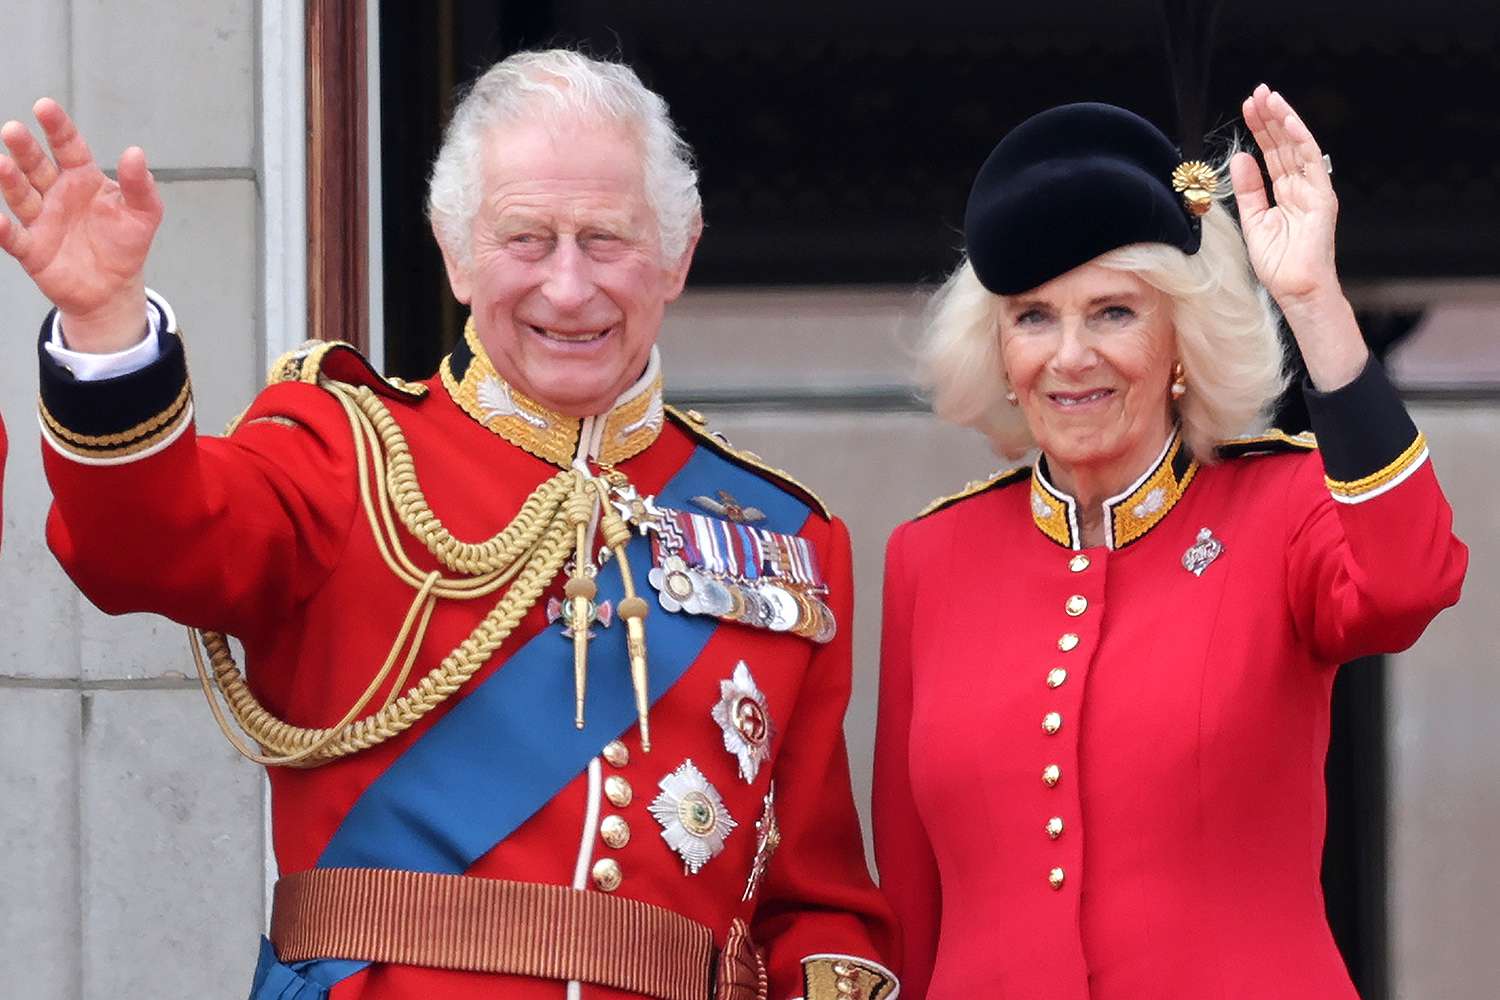 King Charles Confirms Trooping the Colour Attendance amid Cancer with a Change [Video]